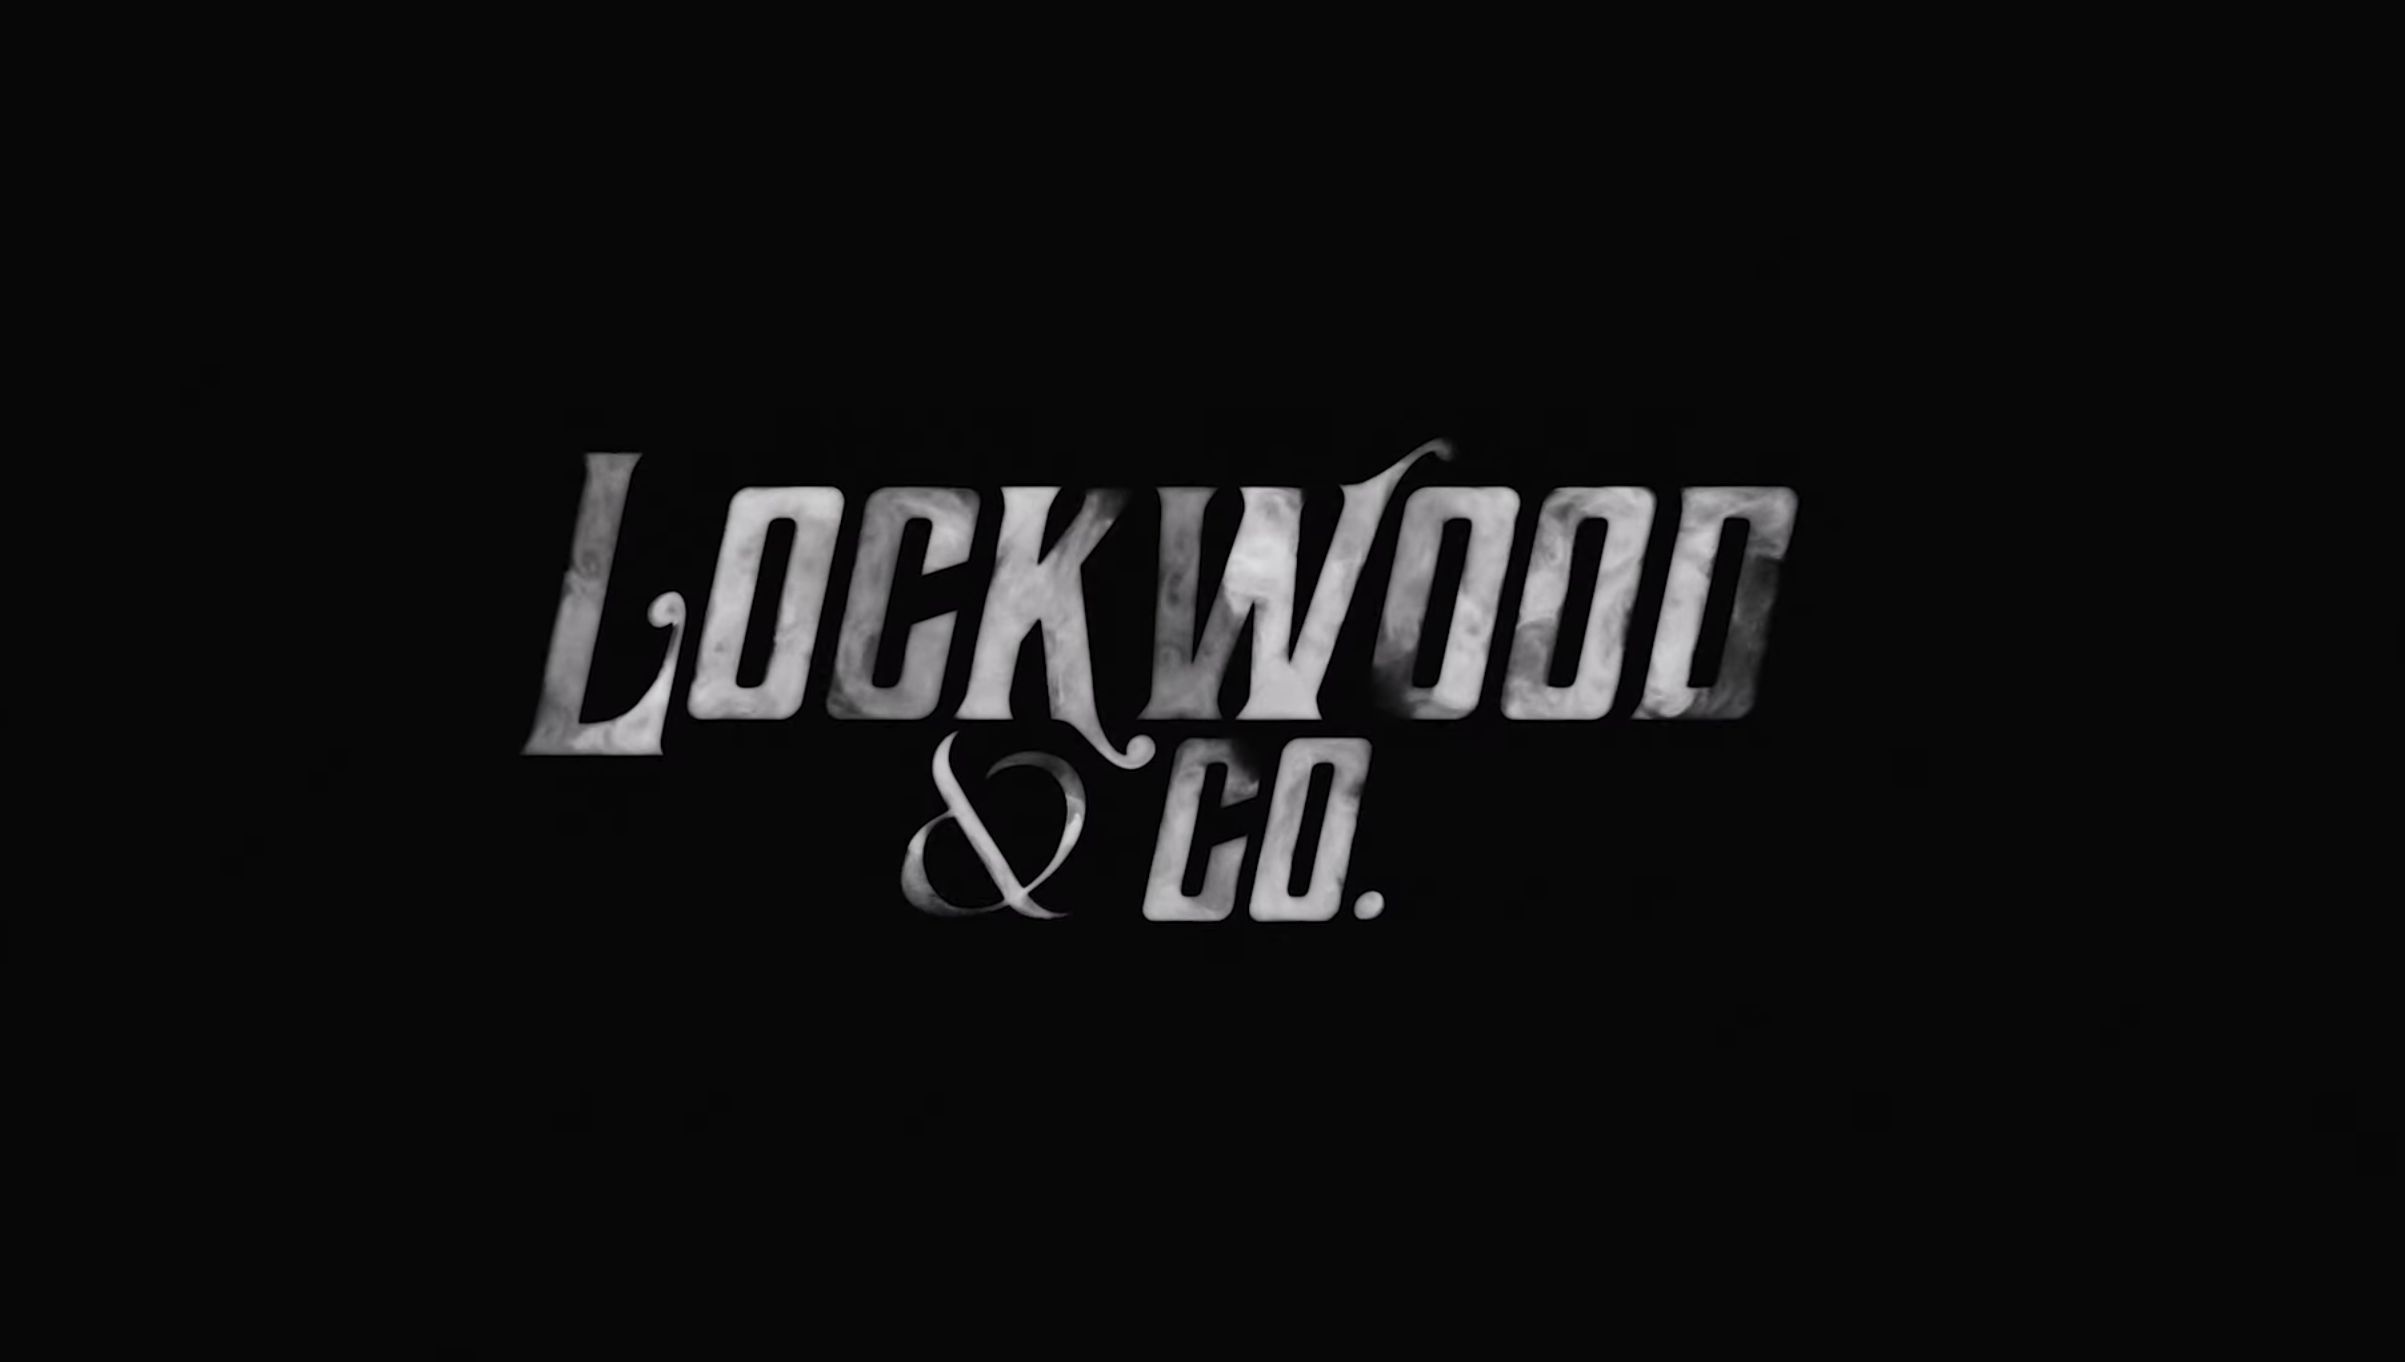 Lockwood & Co: Trailer sets the mood for new thriller fantasy series from Netflix